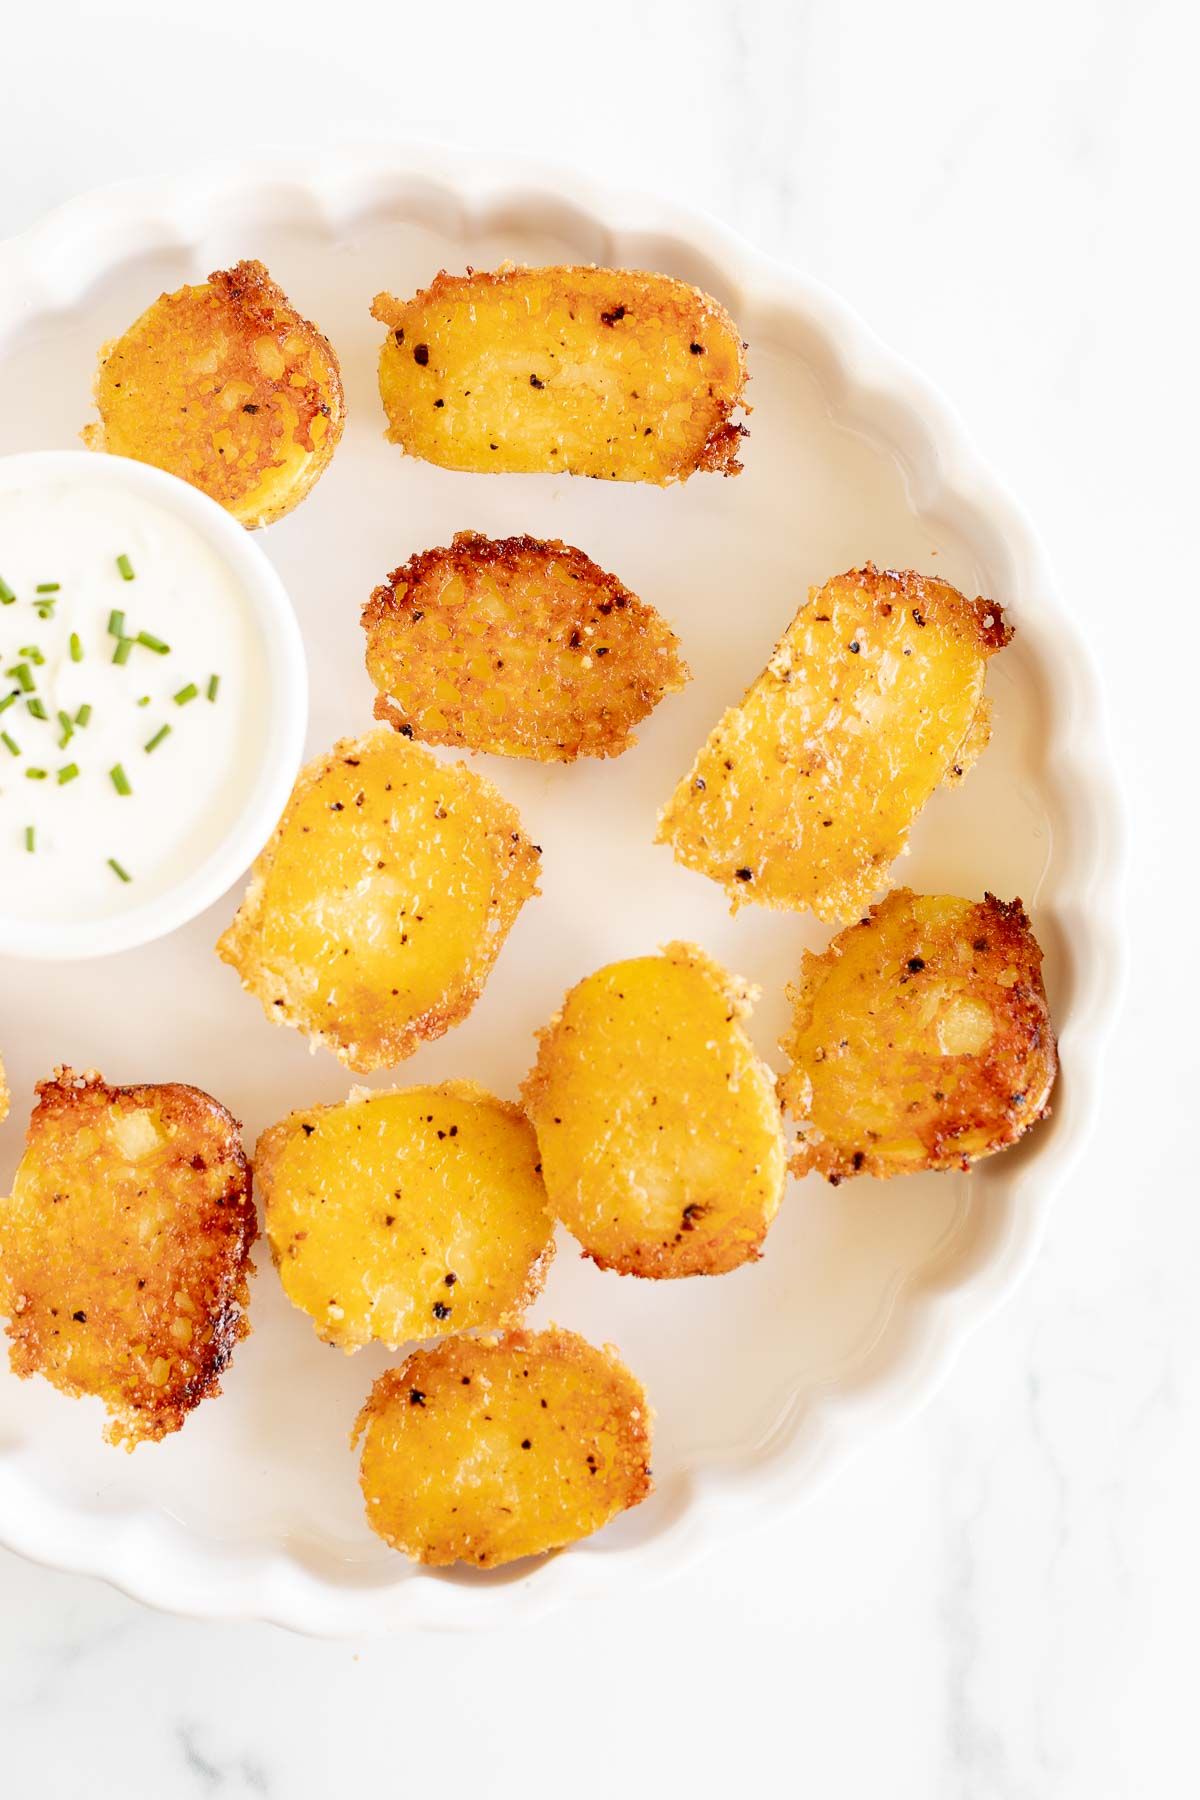 A white ruffled plate full of parmesan potatoes, with a small bowl of sour cream dip.